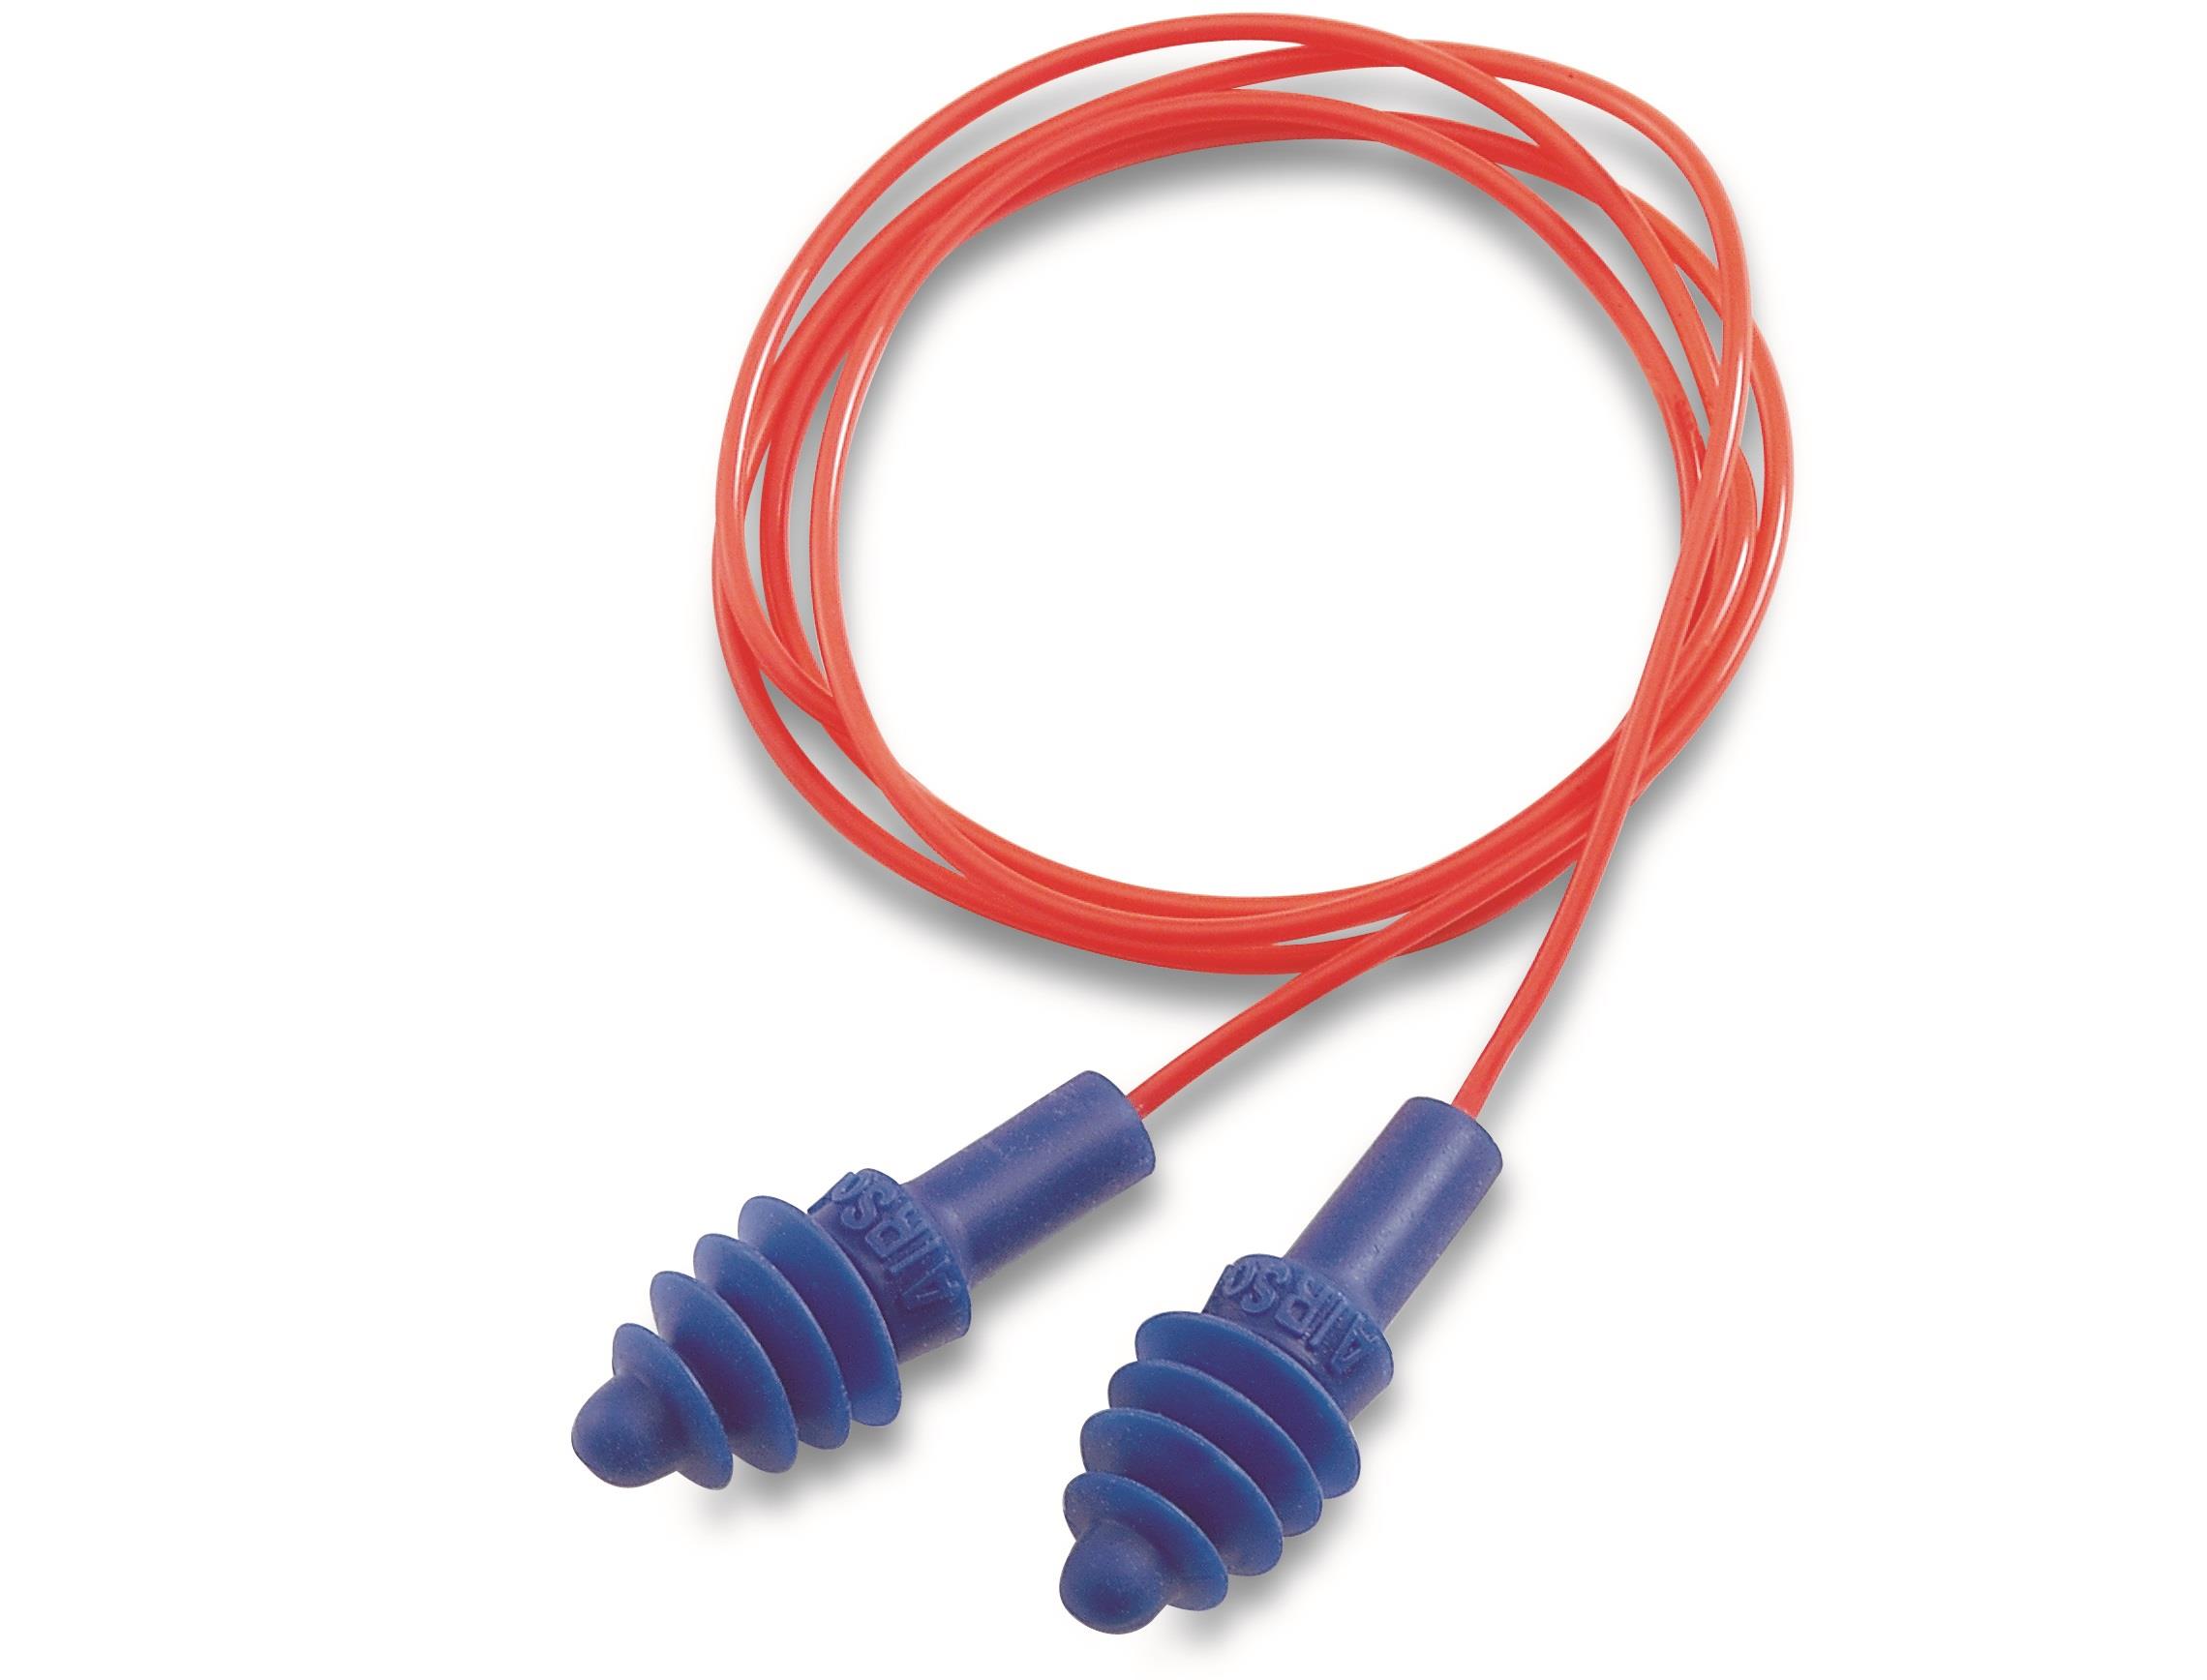 AIRSOFT RED POLYCORD REUSABLE EARPLUGS - Earplugs